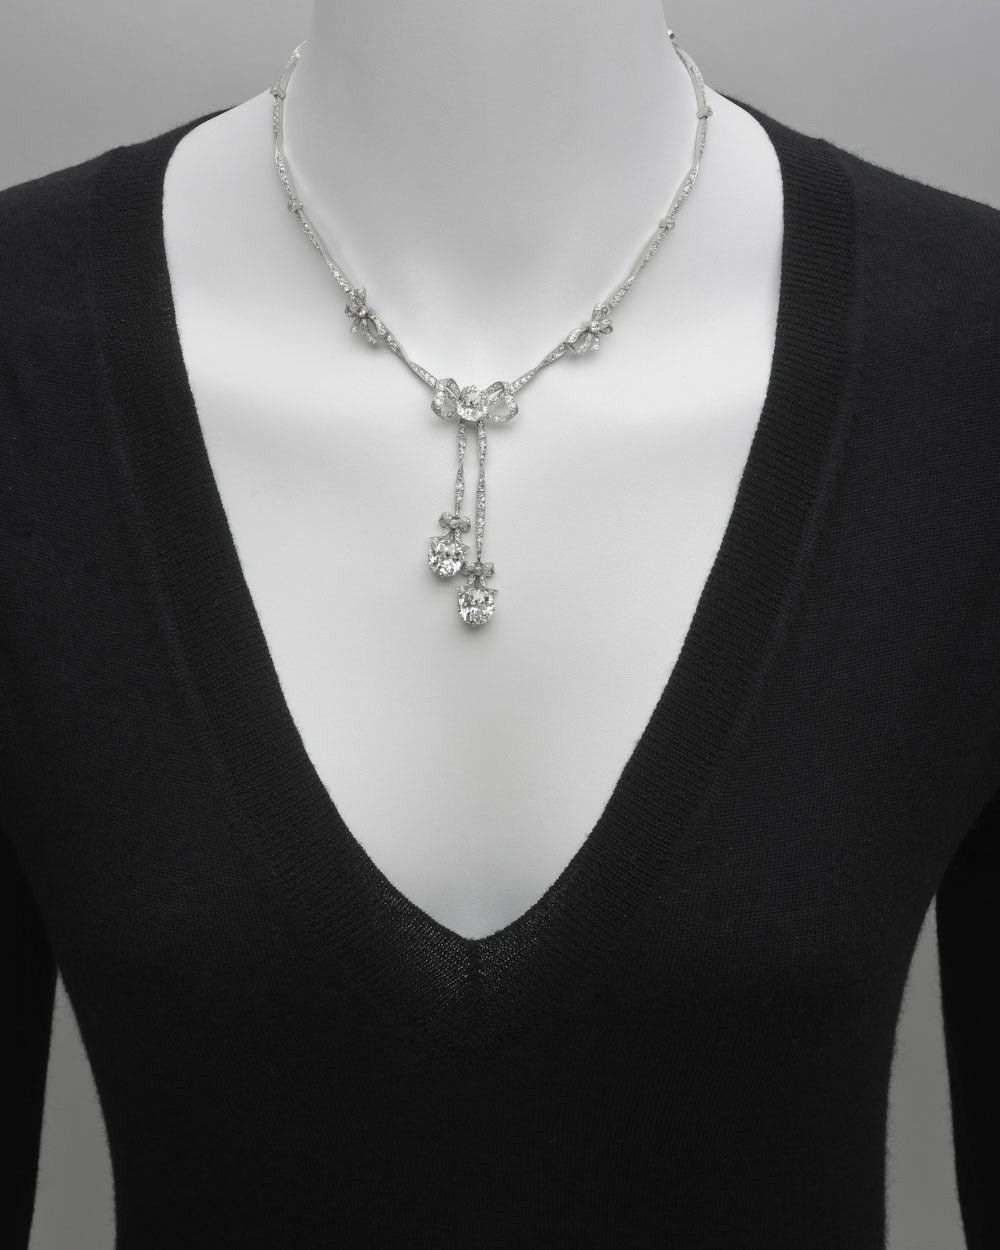 Belle Époque diamond bowknot motif necklace, the delicate twist ribbon mount set with 128 rose and old mine-cut diamonds weighing approximately 4.10 total carats, 6 collet-set diamonds weighing approximately 0.50 total carats, and 2 small bowknot